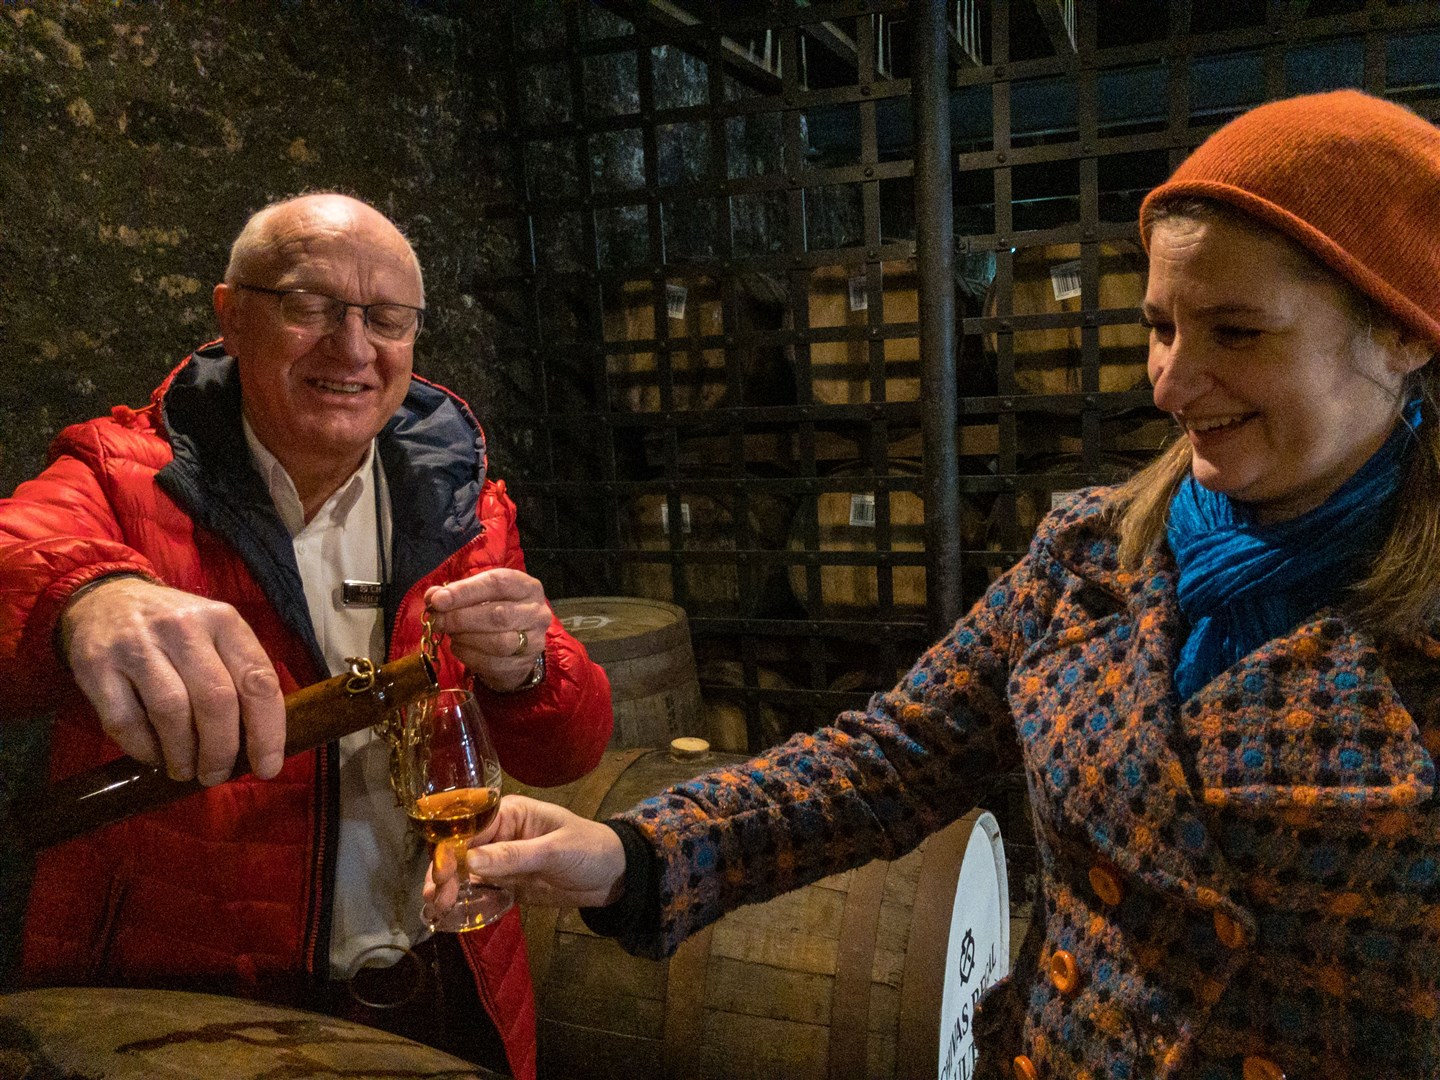 Distillery guide Mike Collins pours a dram for a visitor.